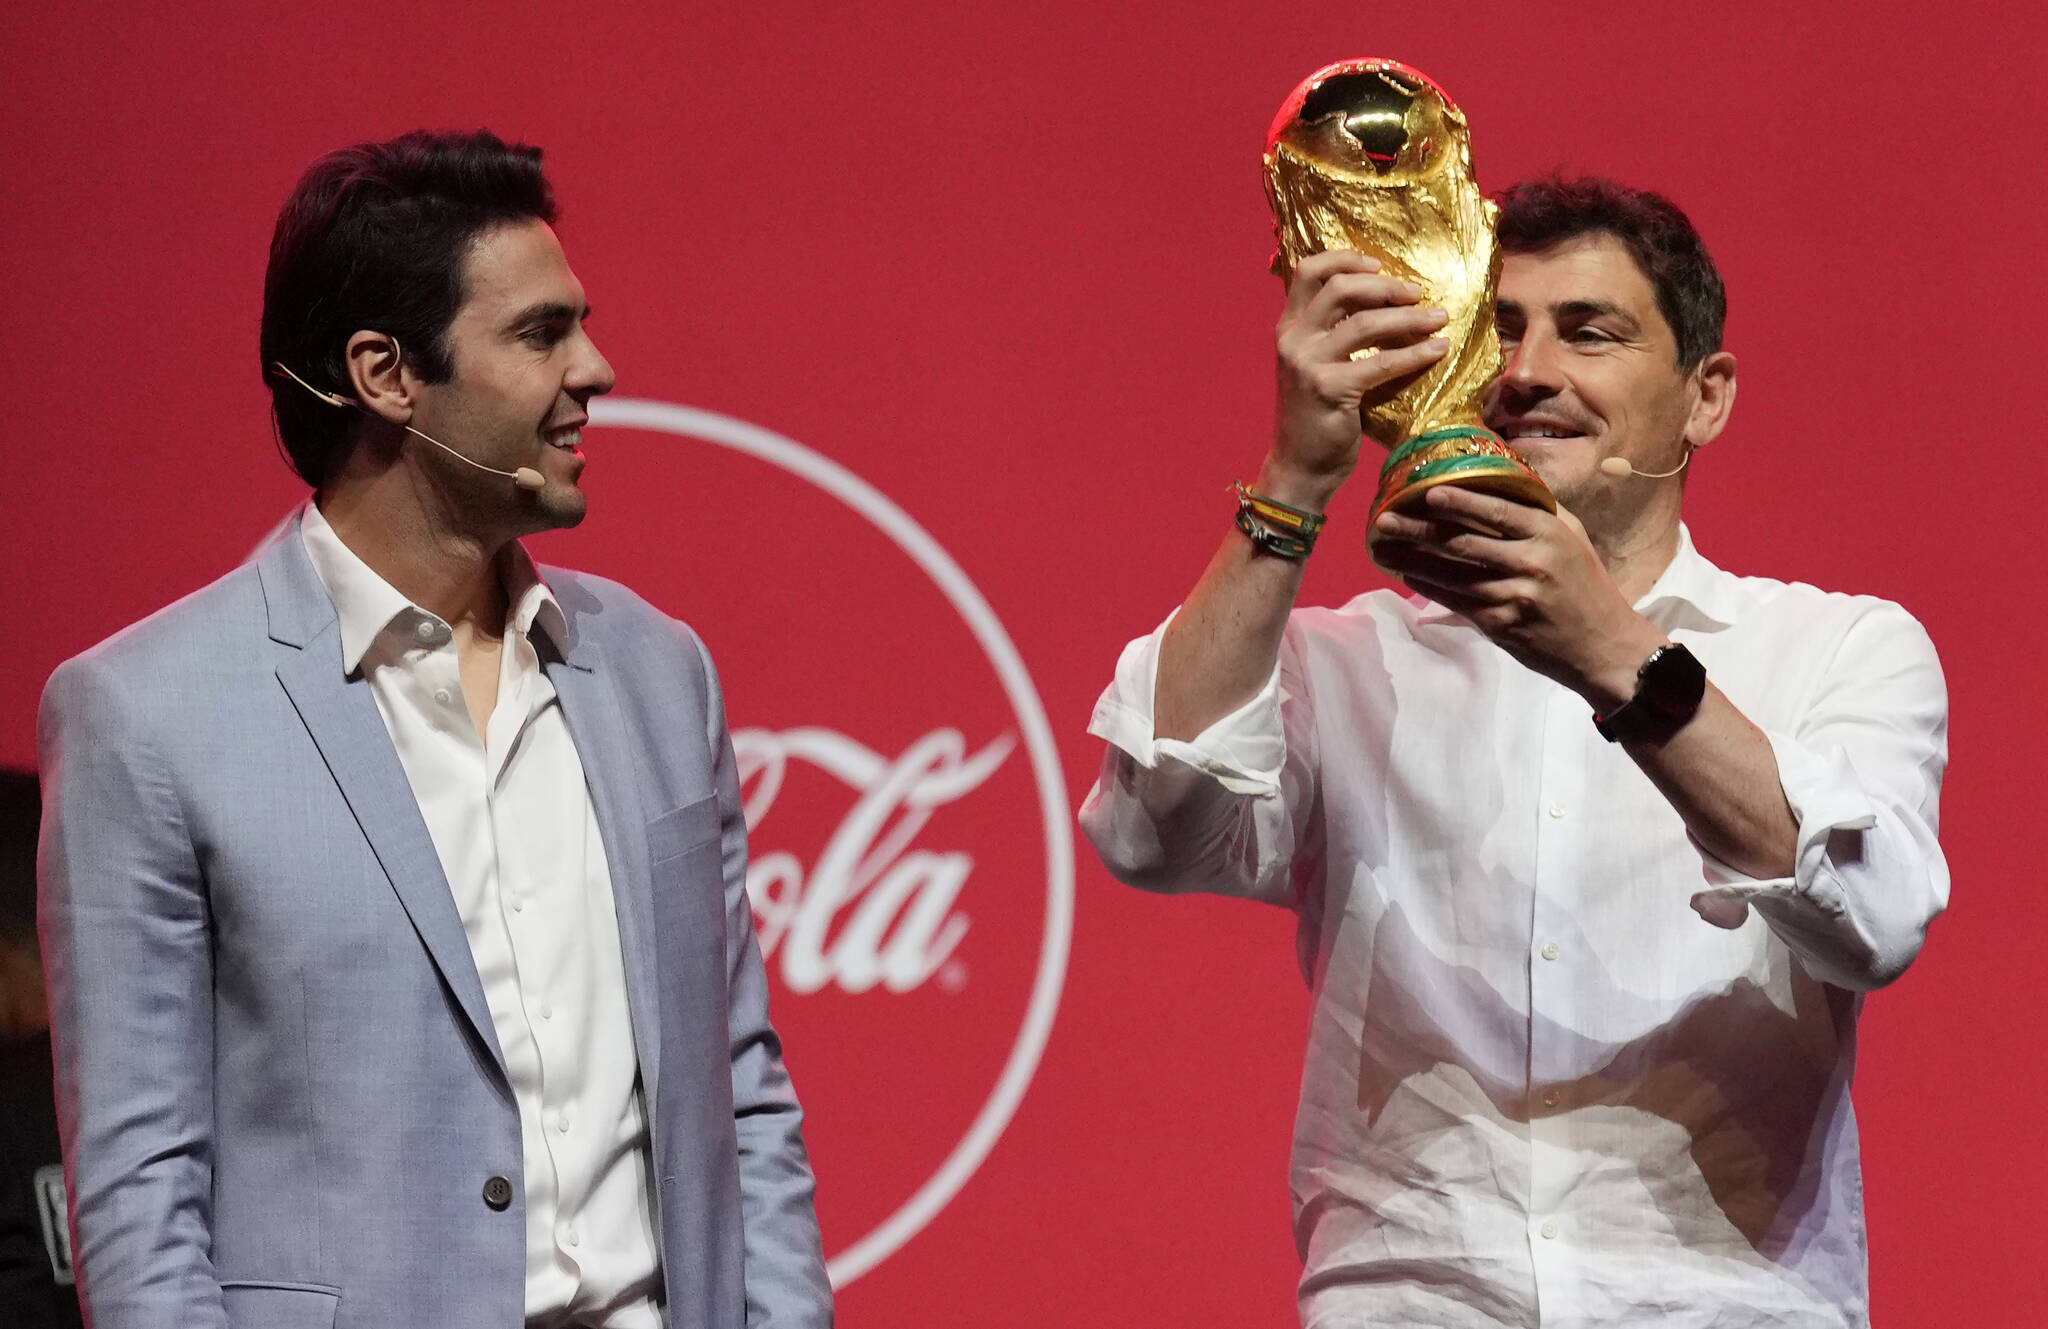 Former Brazilian player KakÃ¡, left, and former Spanish player Iker Casillas present the Qatar FIFA World Cup trophy during the Trophy Tour by Coca-Cola kicked off today with a first-stop event in Dubai, United Arab Emirates, Thursday, May 12, 2022. (AP Photo/Kamran Jebreili)